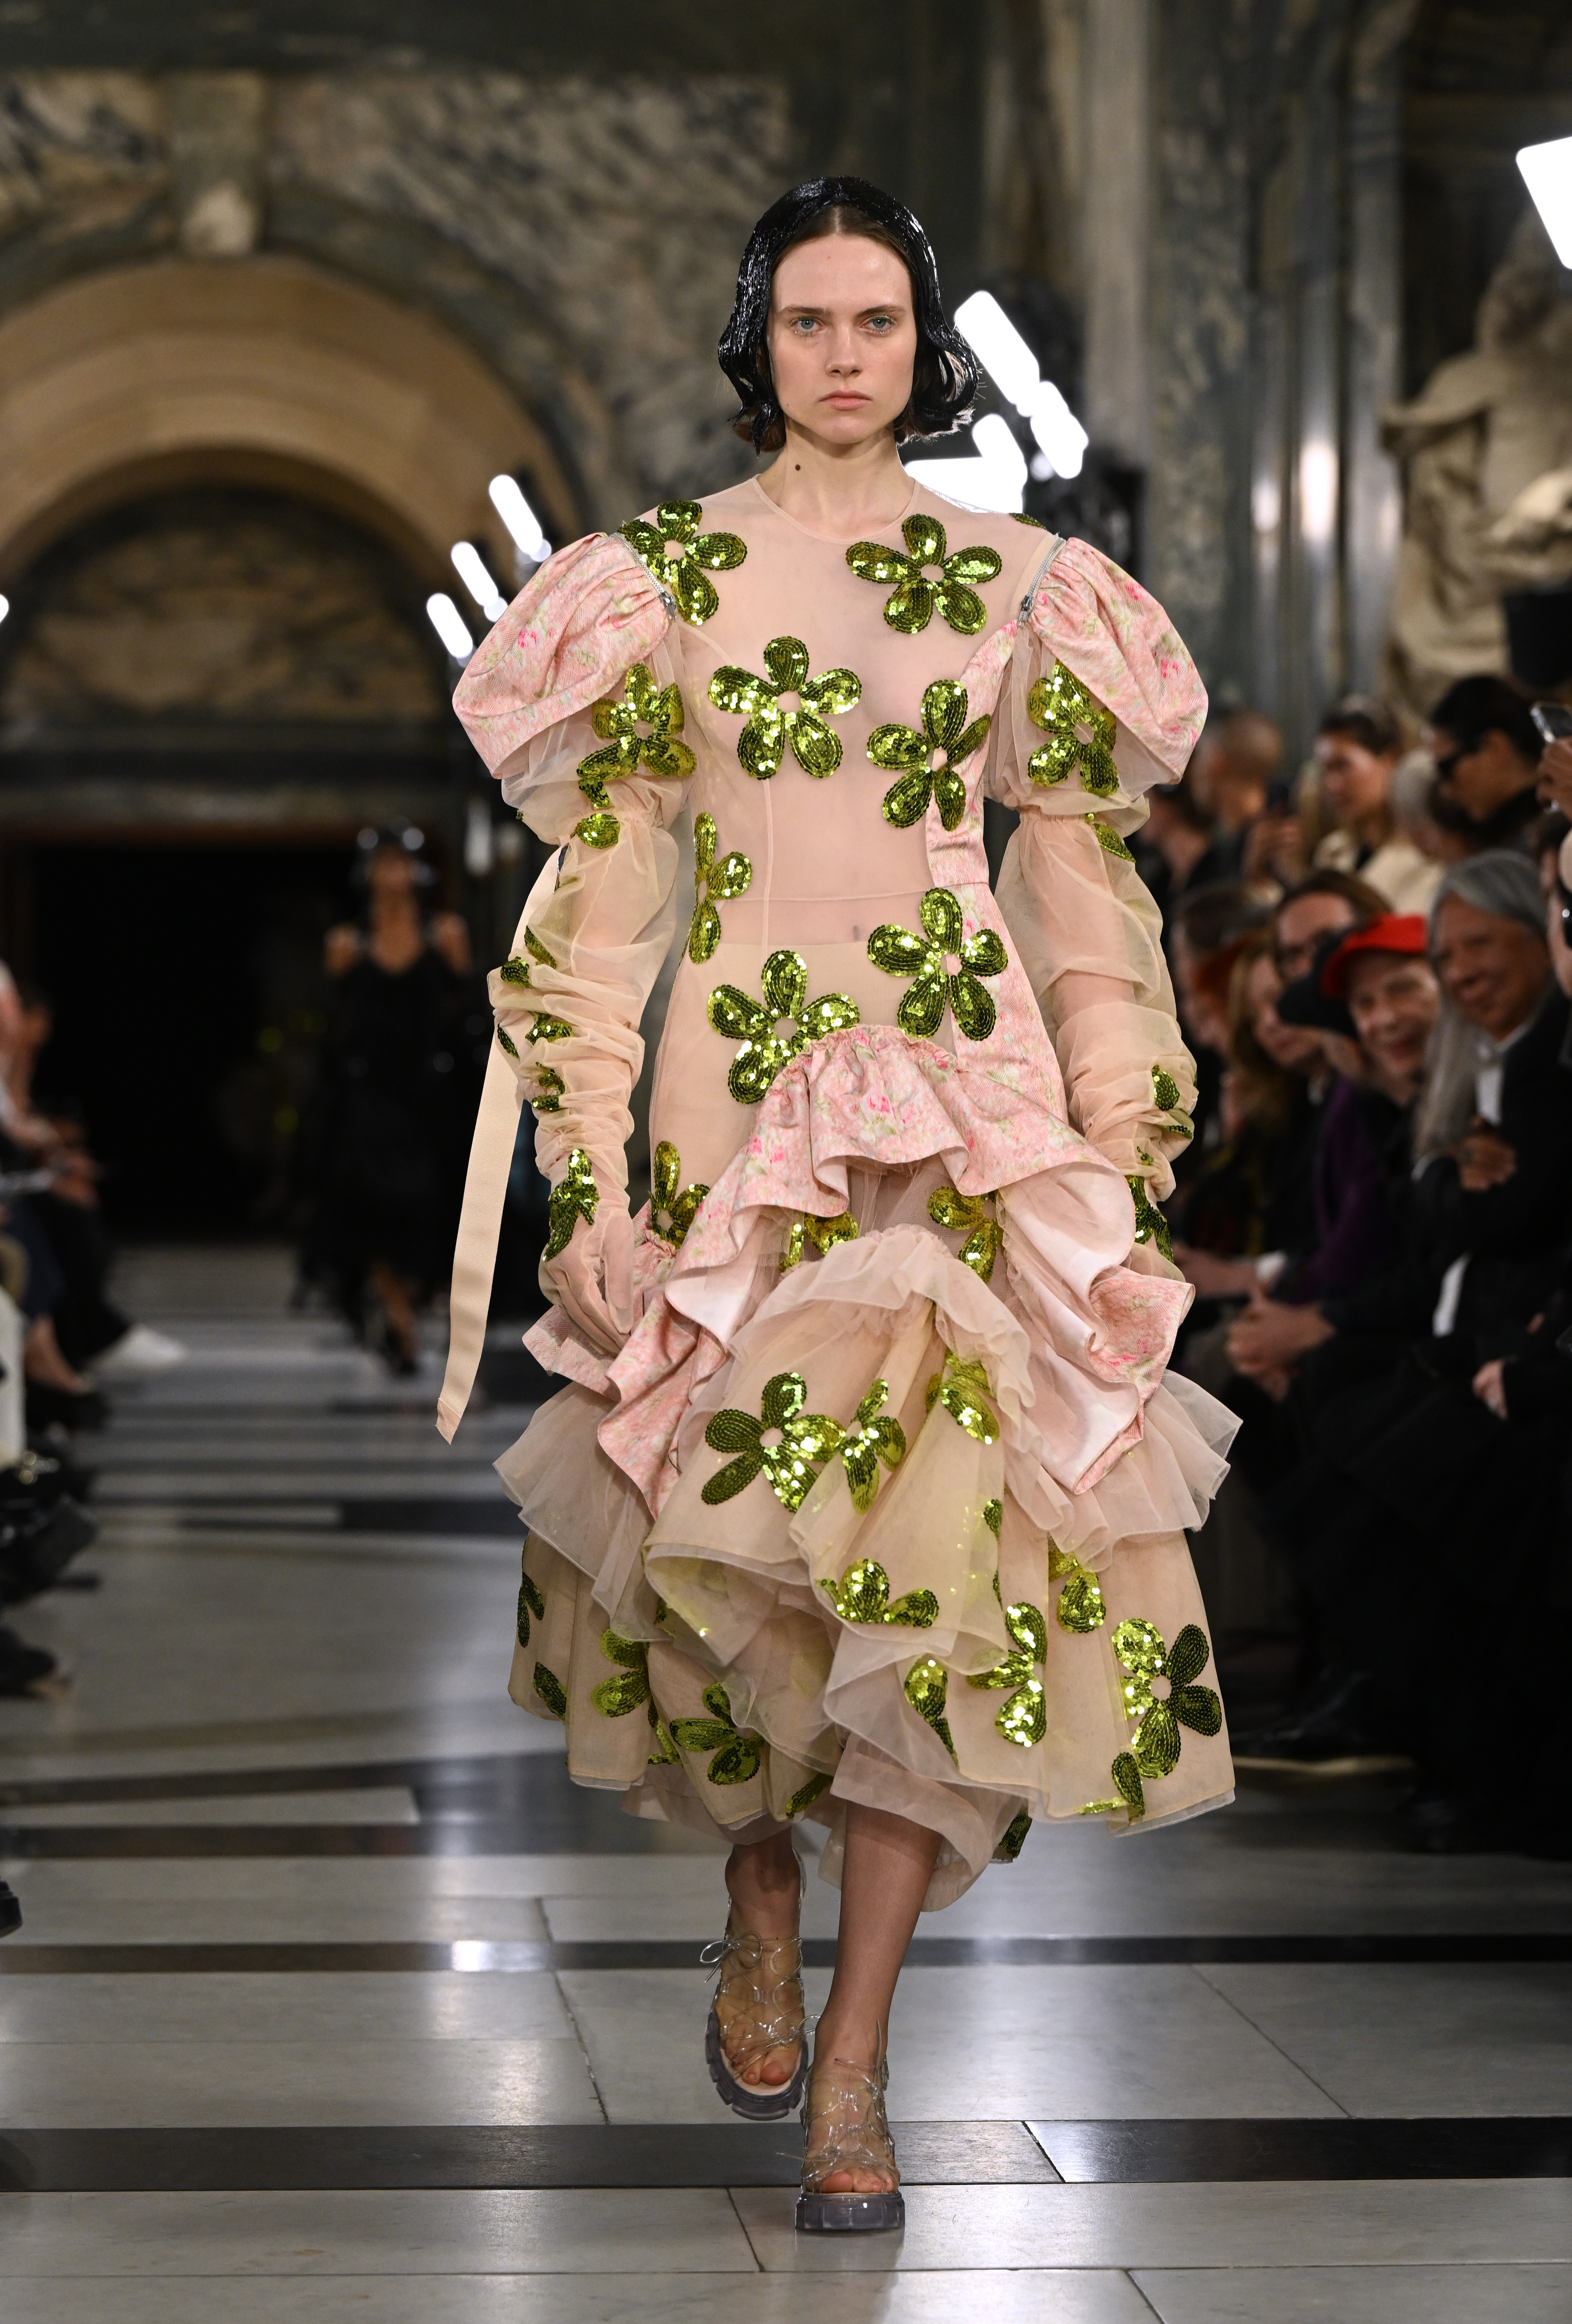 Simone Rocha Brings Her Ethereal Romance To The Old Bailey